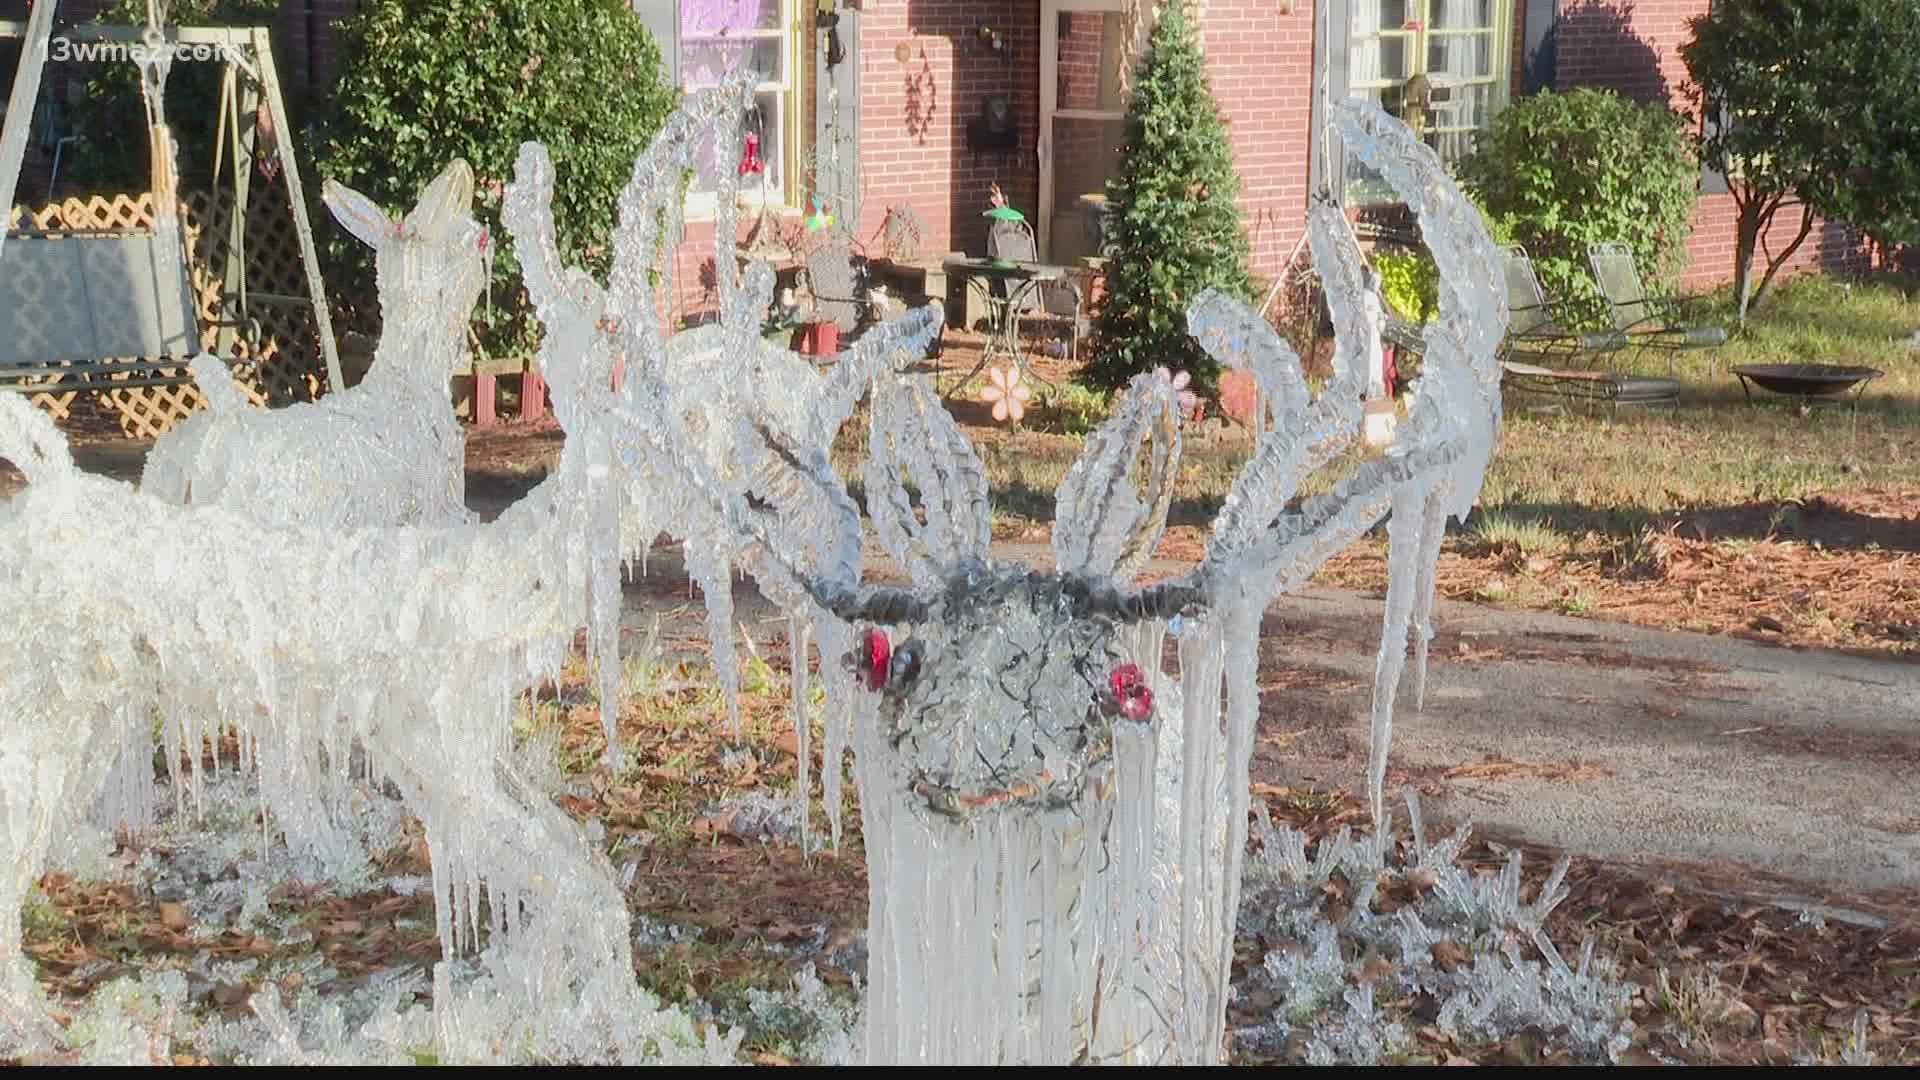 One Macon man is spreading some cheer of his own while having fun with the frigid weather.